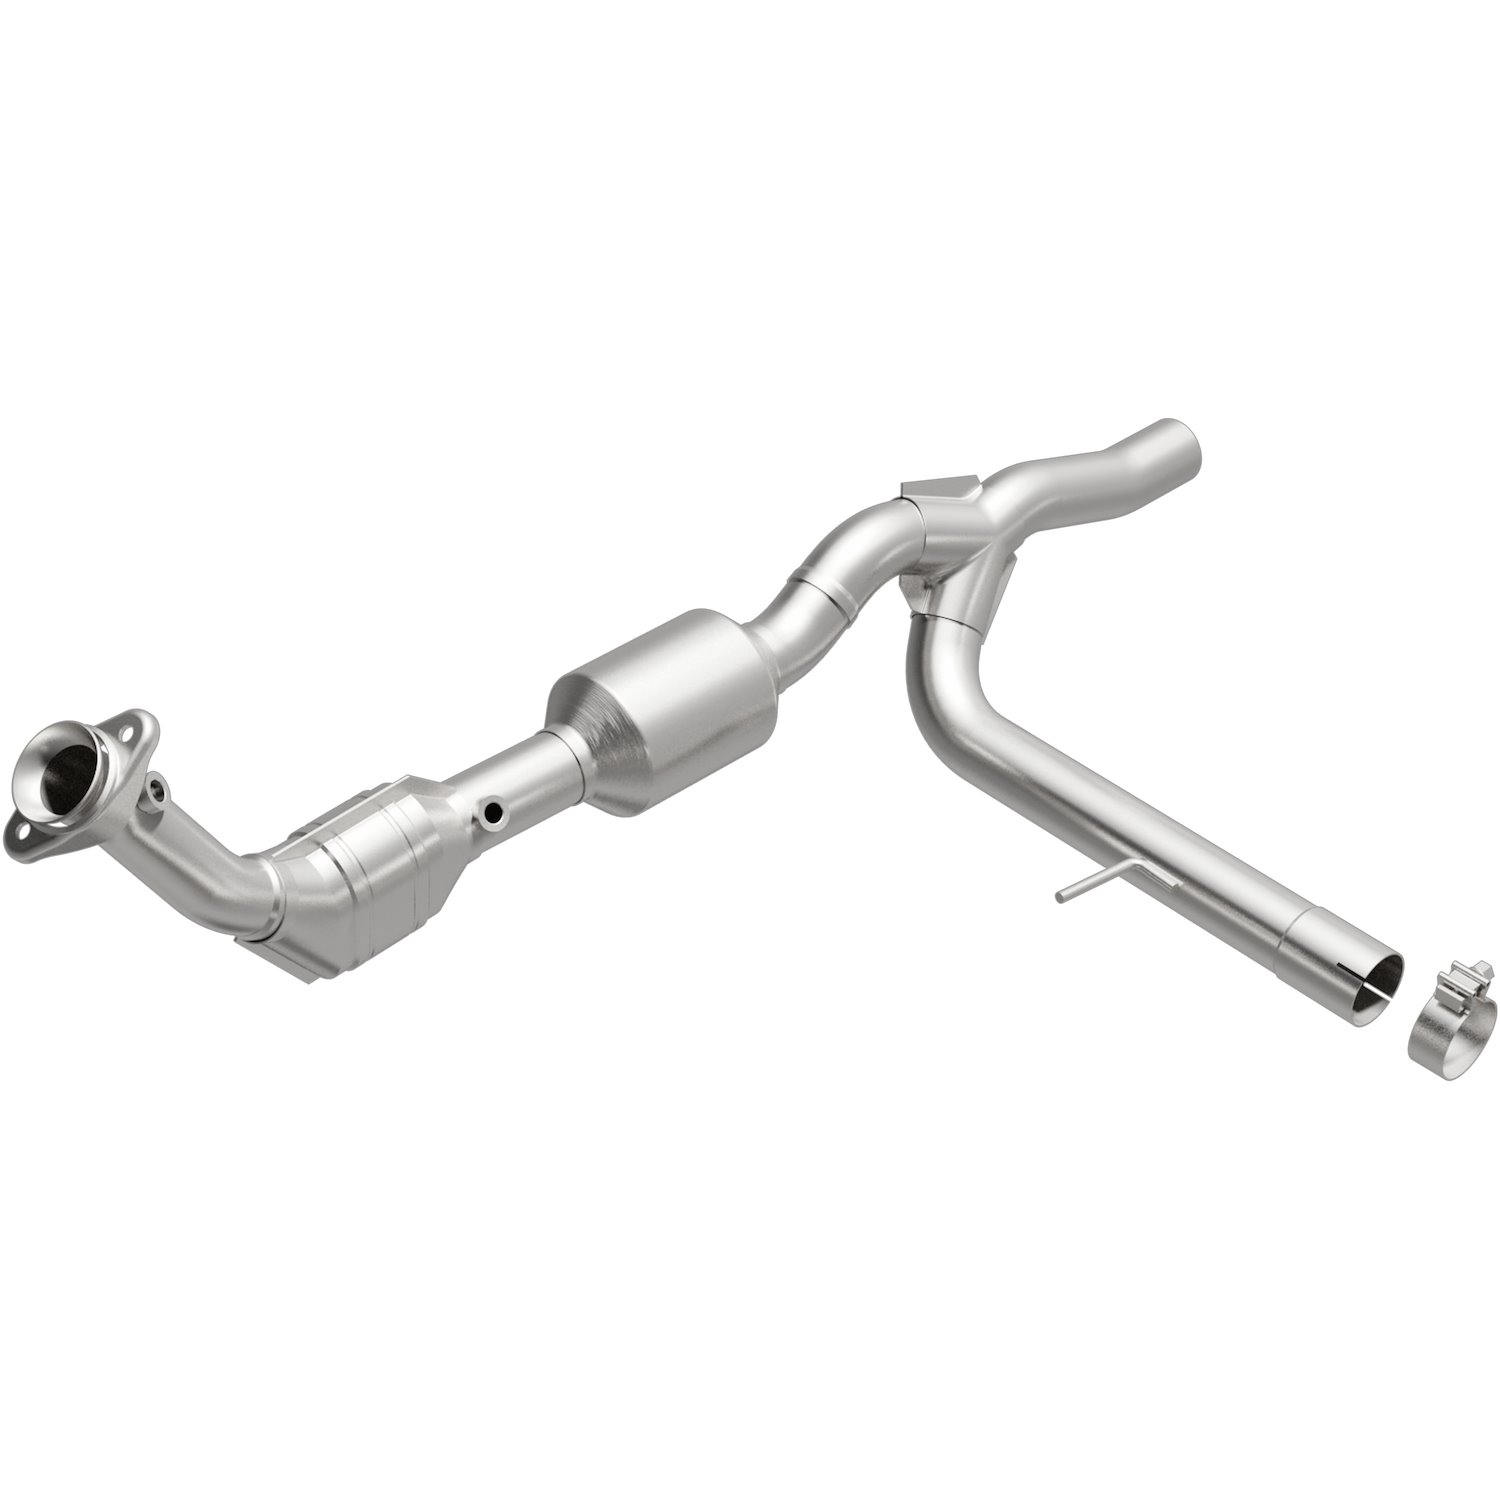 2004-2006 Ford F-150 OEM Grade Federal / EPA Compliant Direct-Fit Catalytic Converter